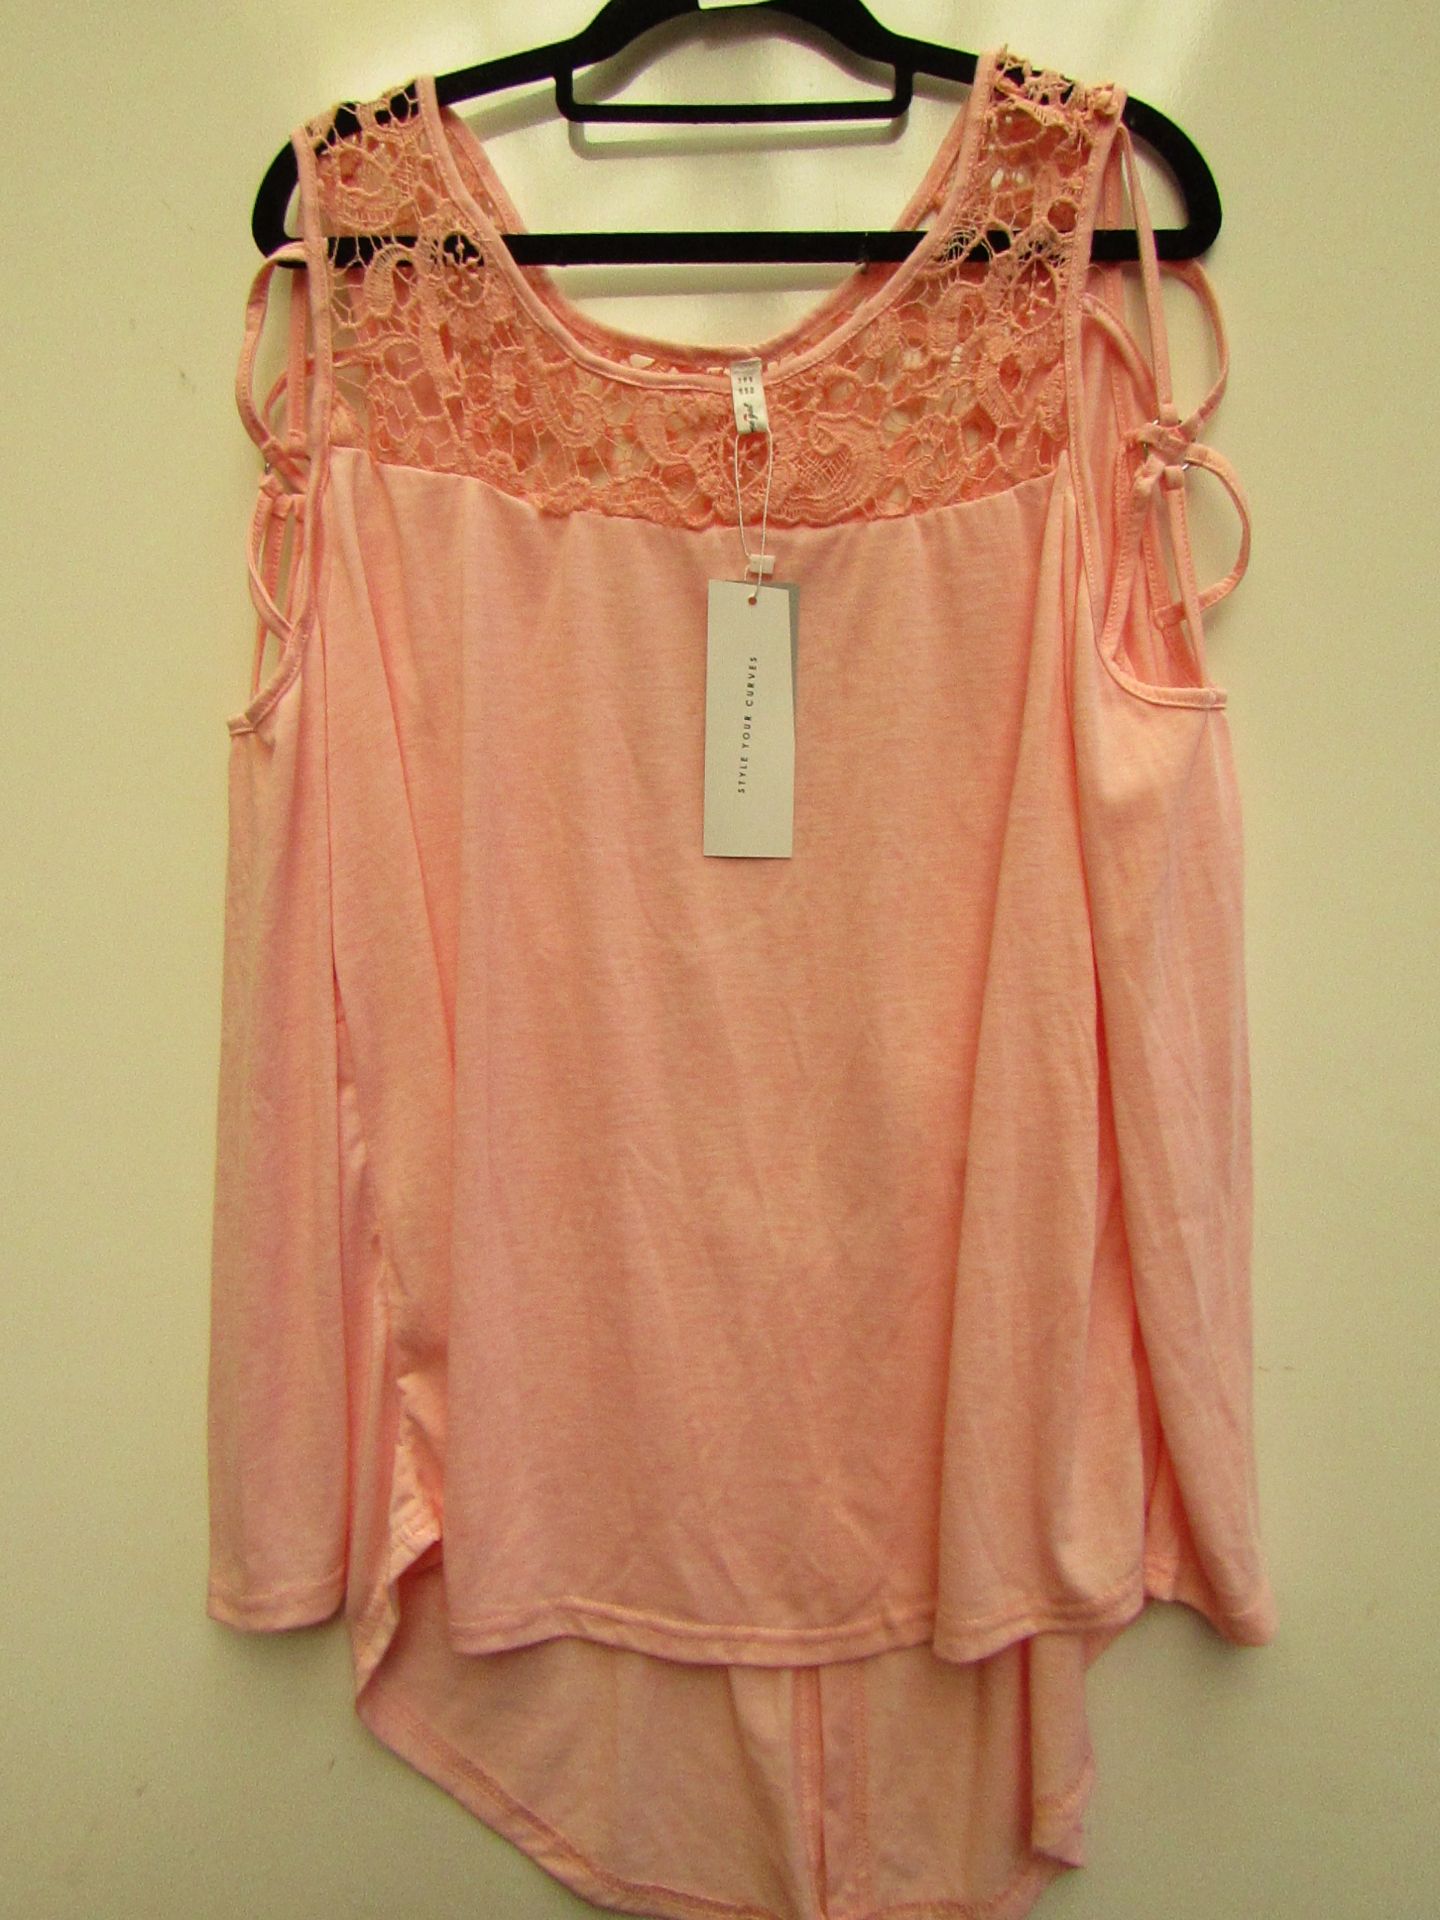 Rose Gala Ladies Cold Shoukder Top size 18 new with tag